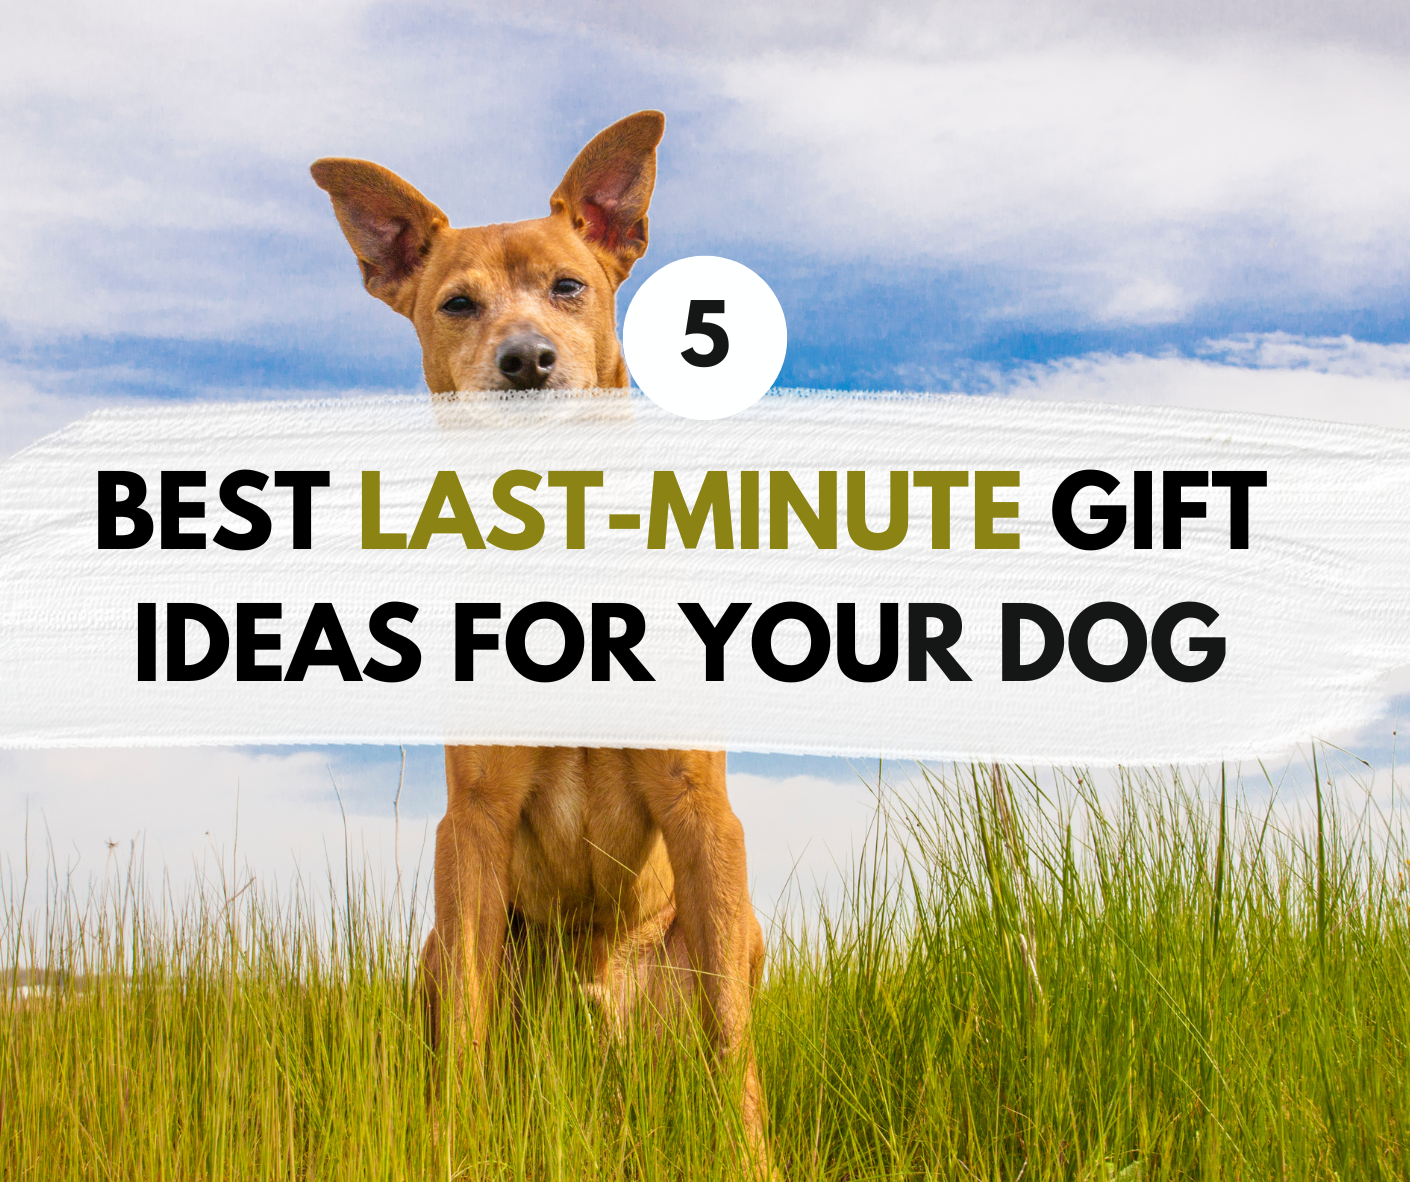 5 Last-Minute Gift Ideas for Your Dog This National Puppy Day